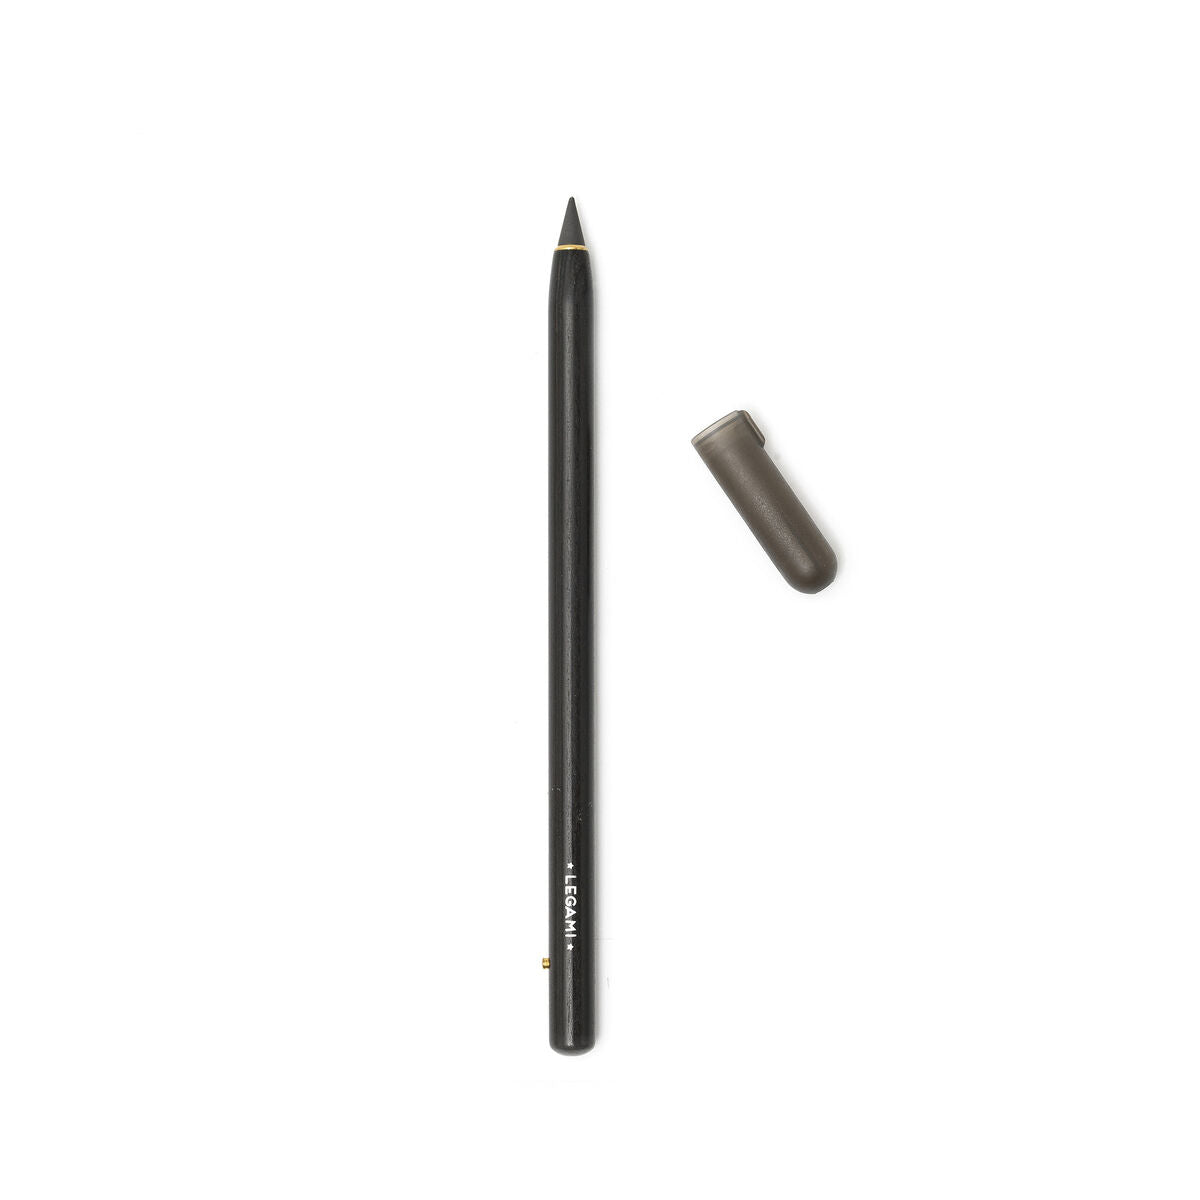 Stationery | Legami Magic Pencil by Weirs of Baggot Street